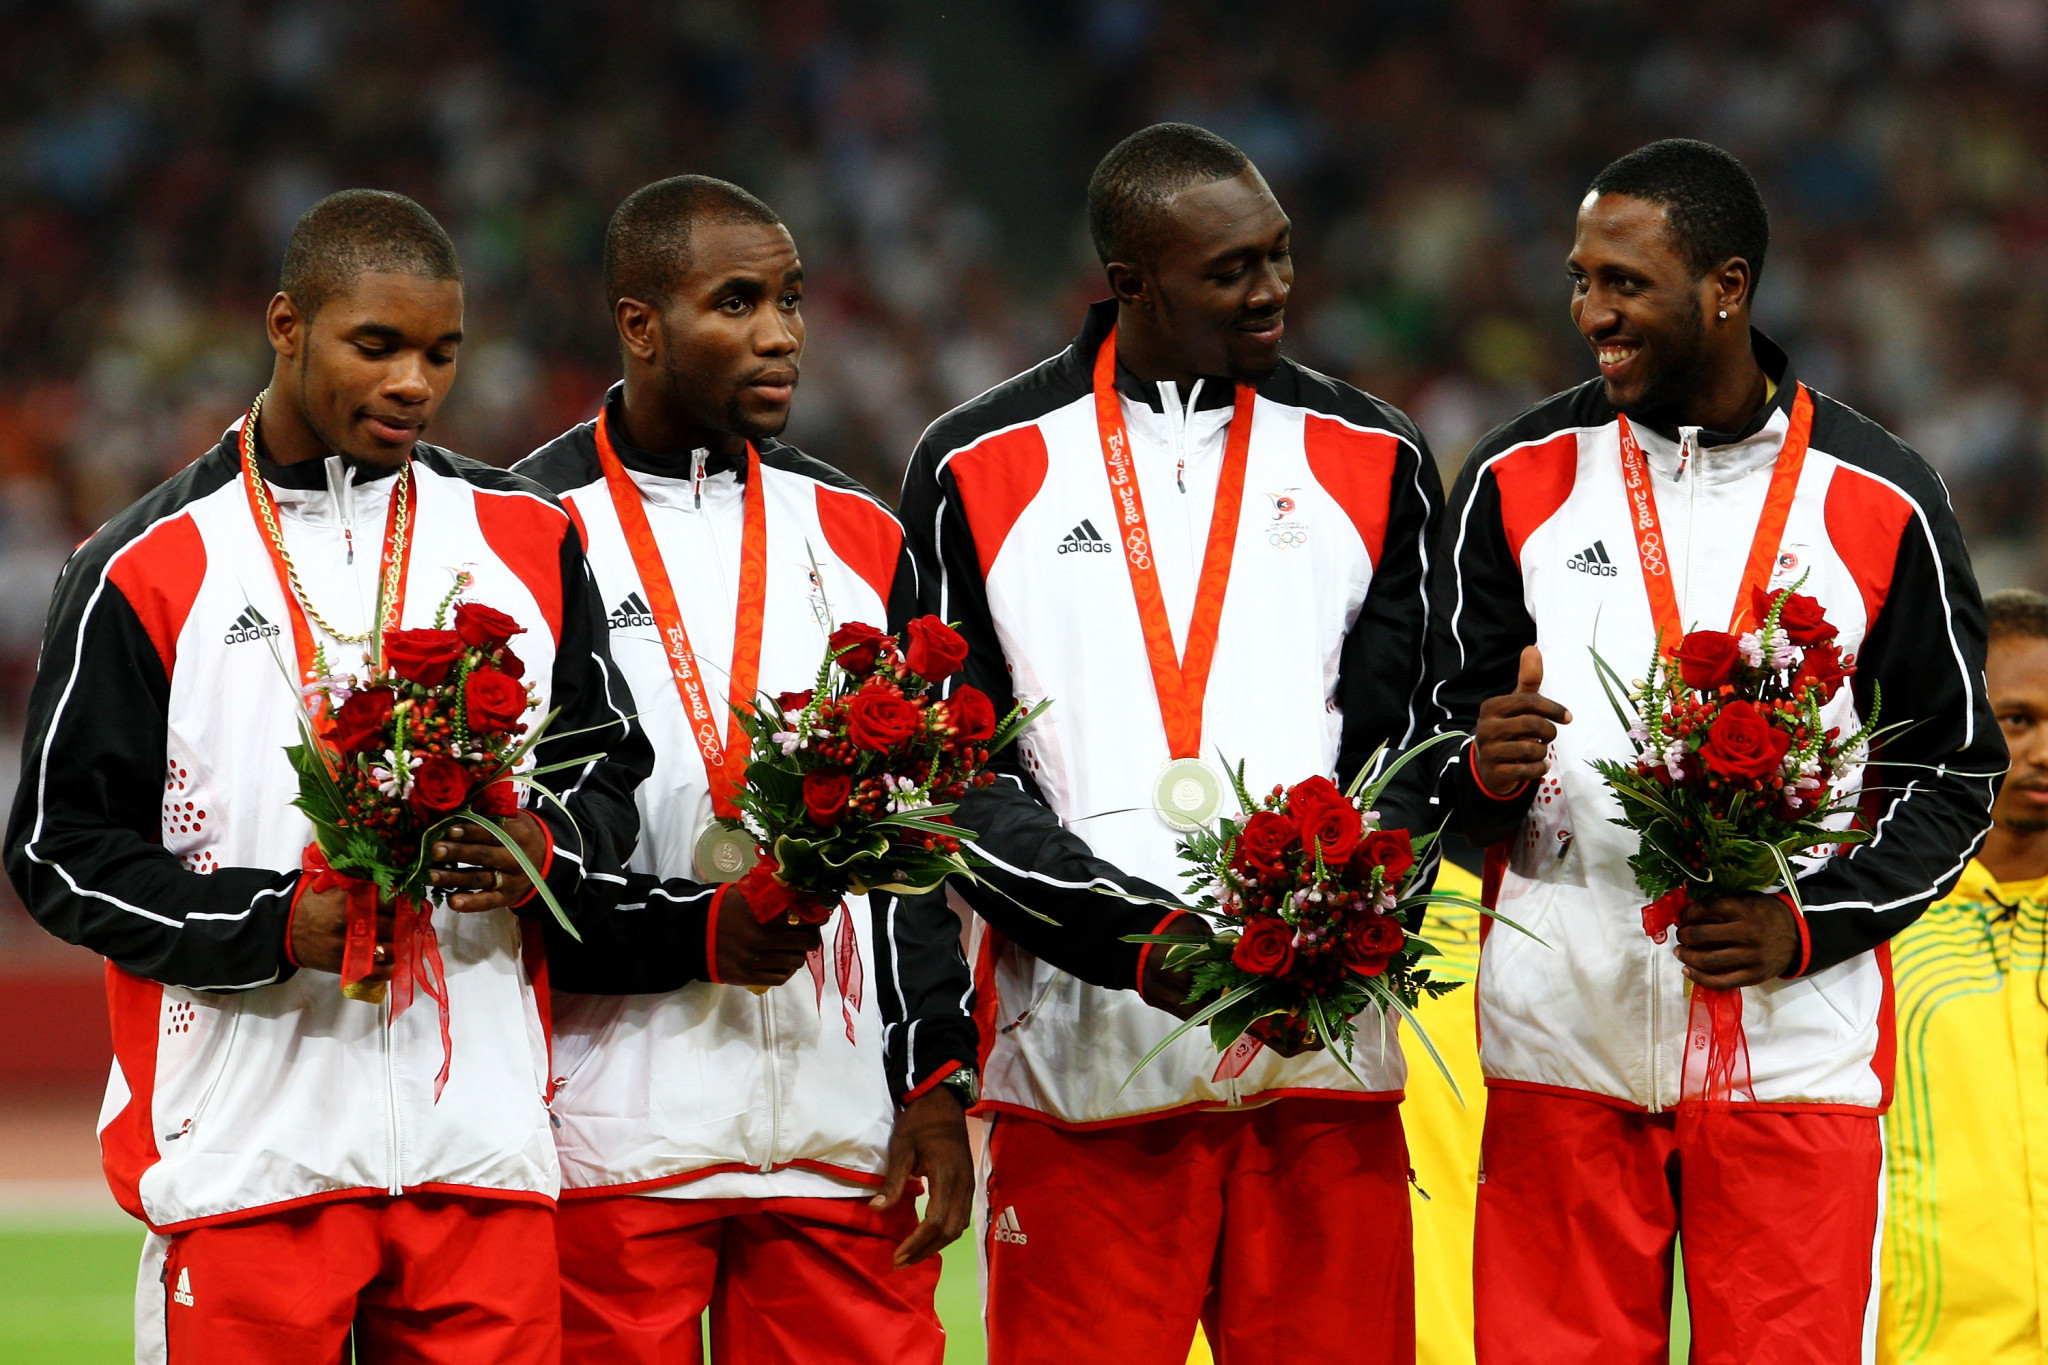 Trinidad and Tobago sprinters receive relay gold from Beijing 2008